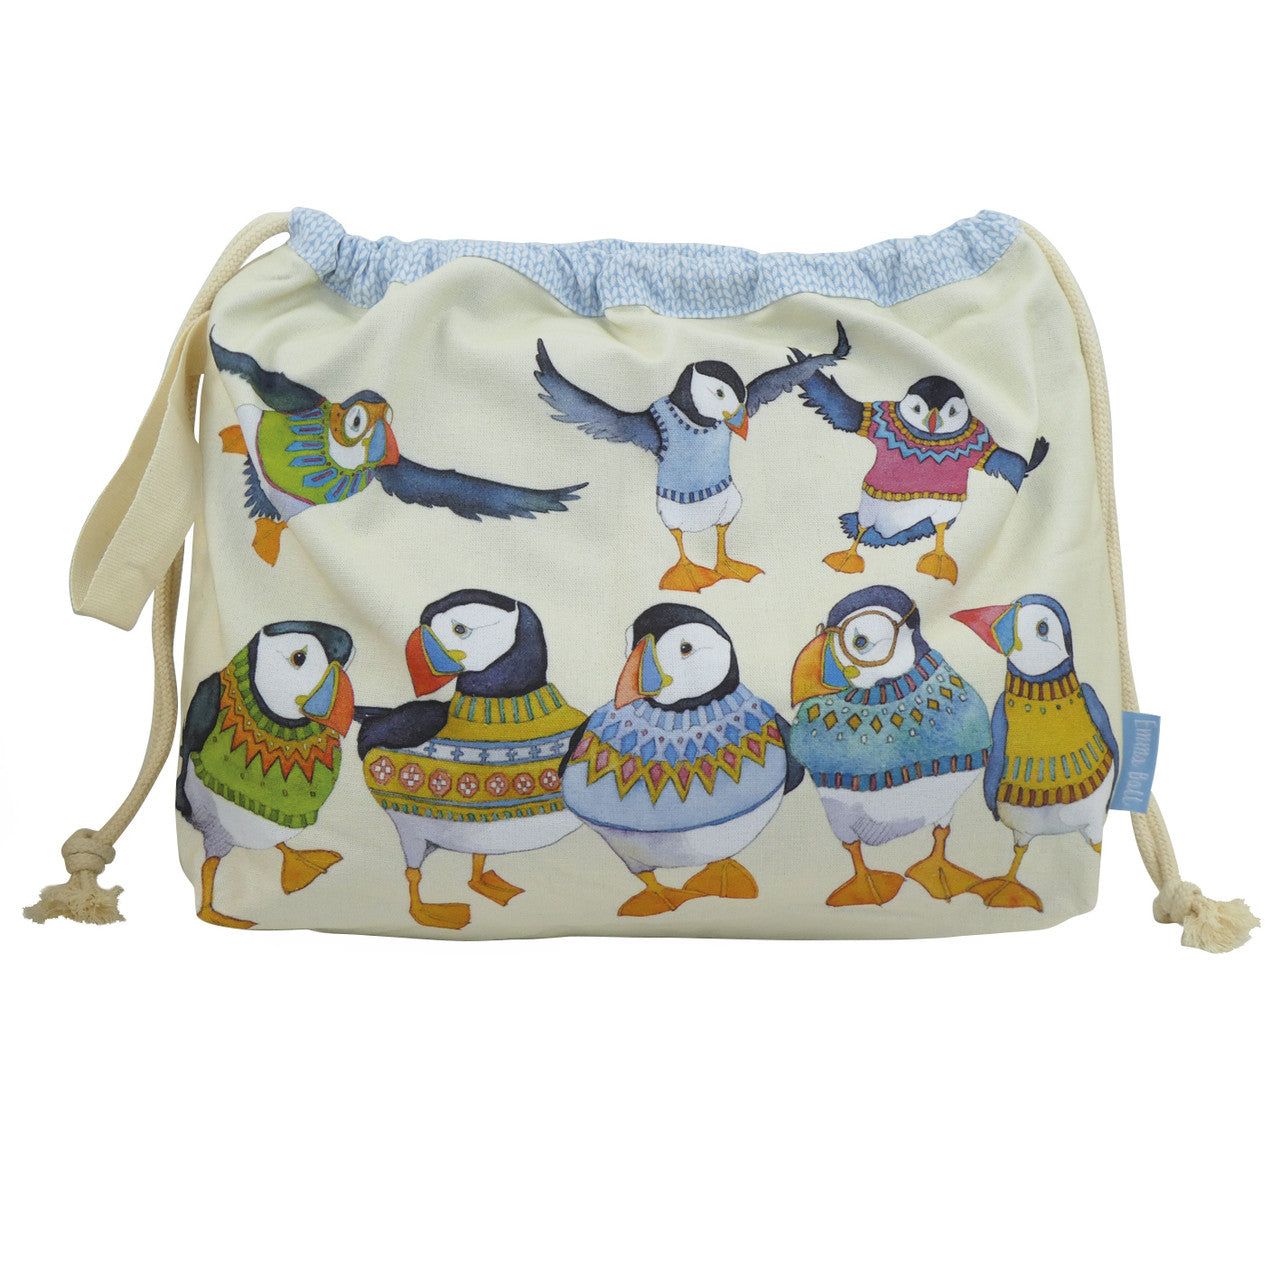 Woolly Puffins Drawstring Cotton Bag from Emma Ball.